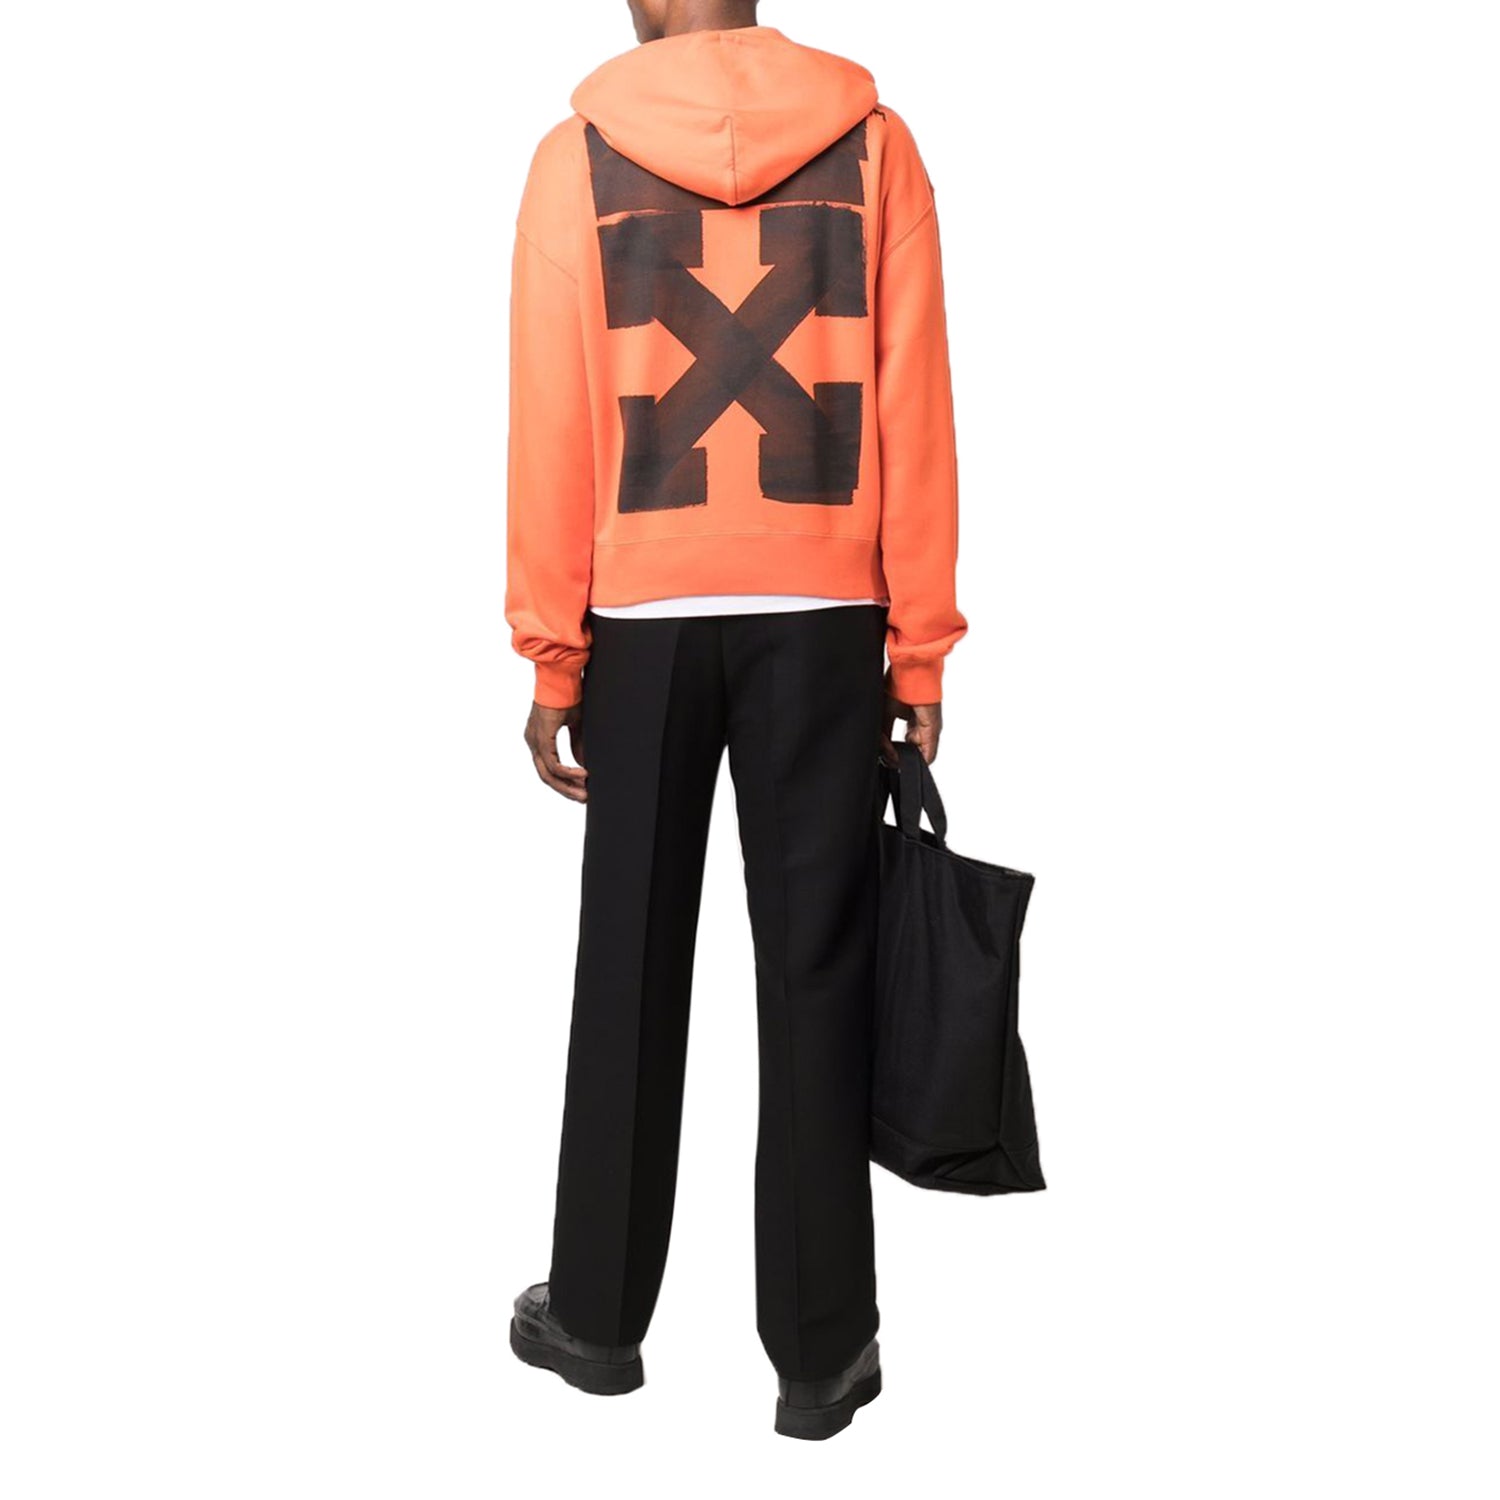 Off-white Jumbo Marker Over Hoodie Mens Style : Ombb037f21fle0162010